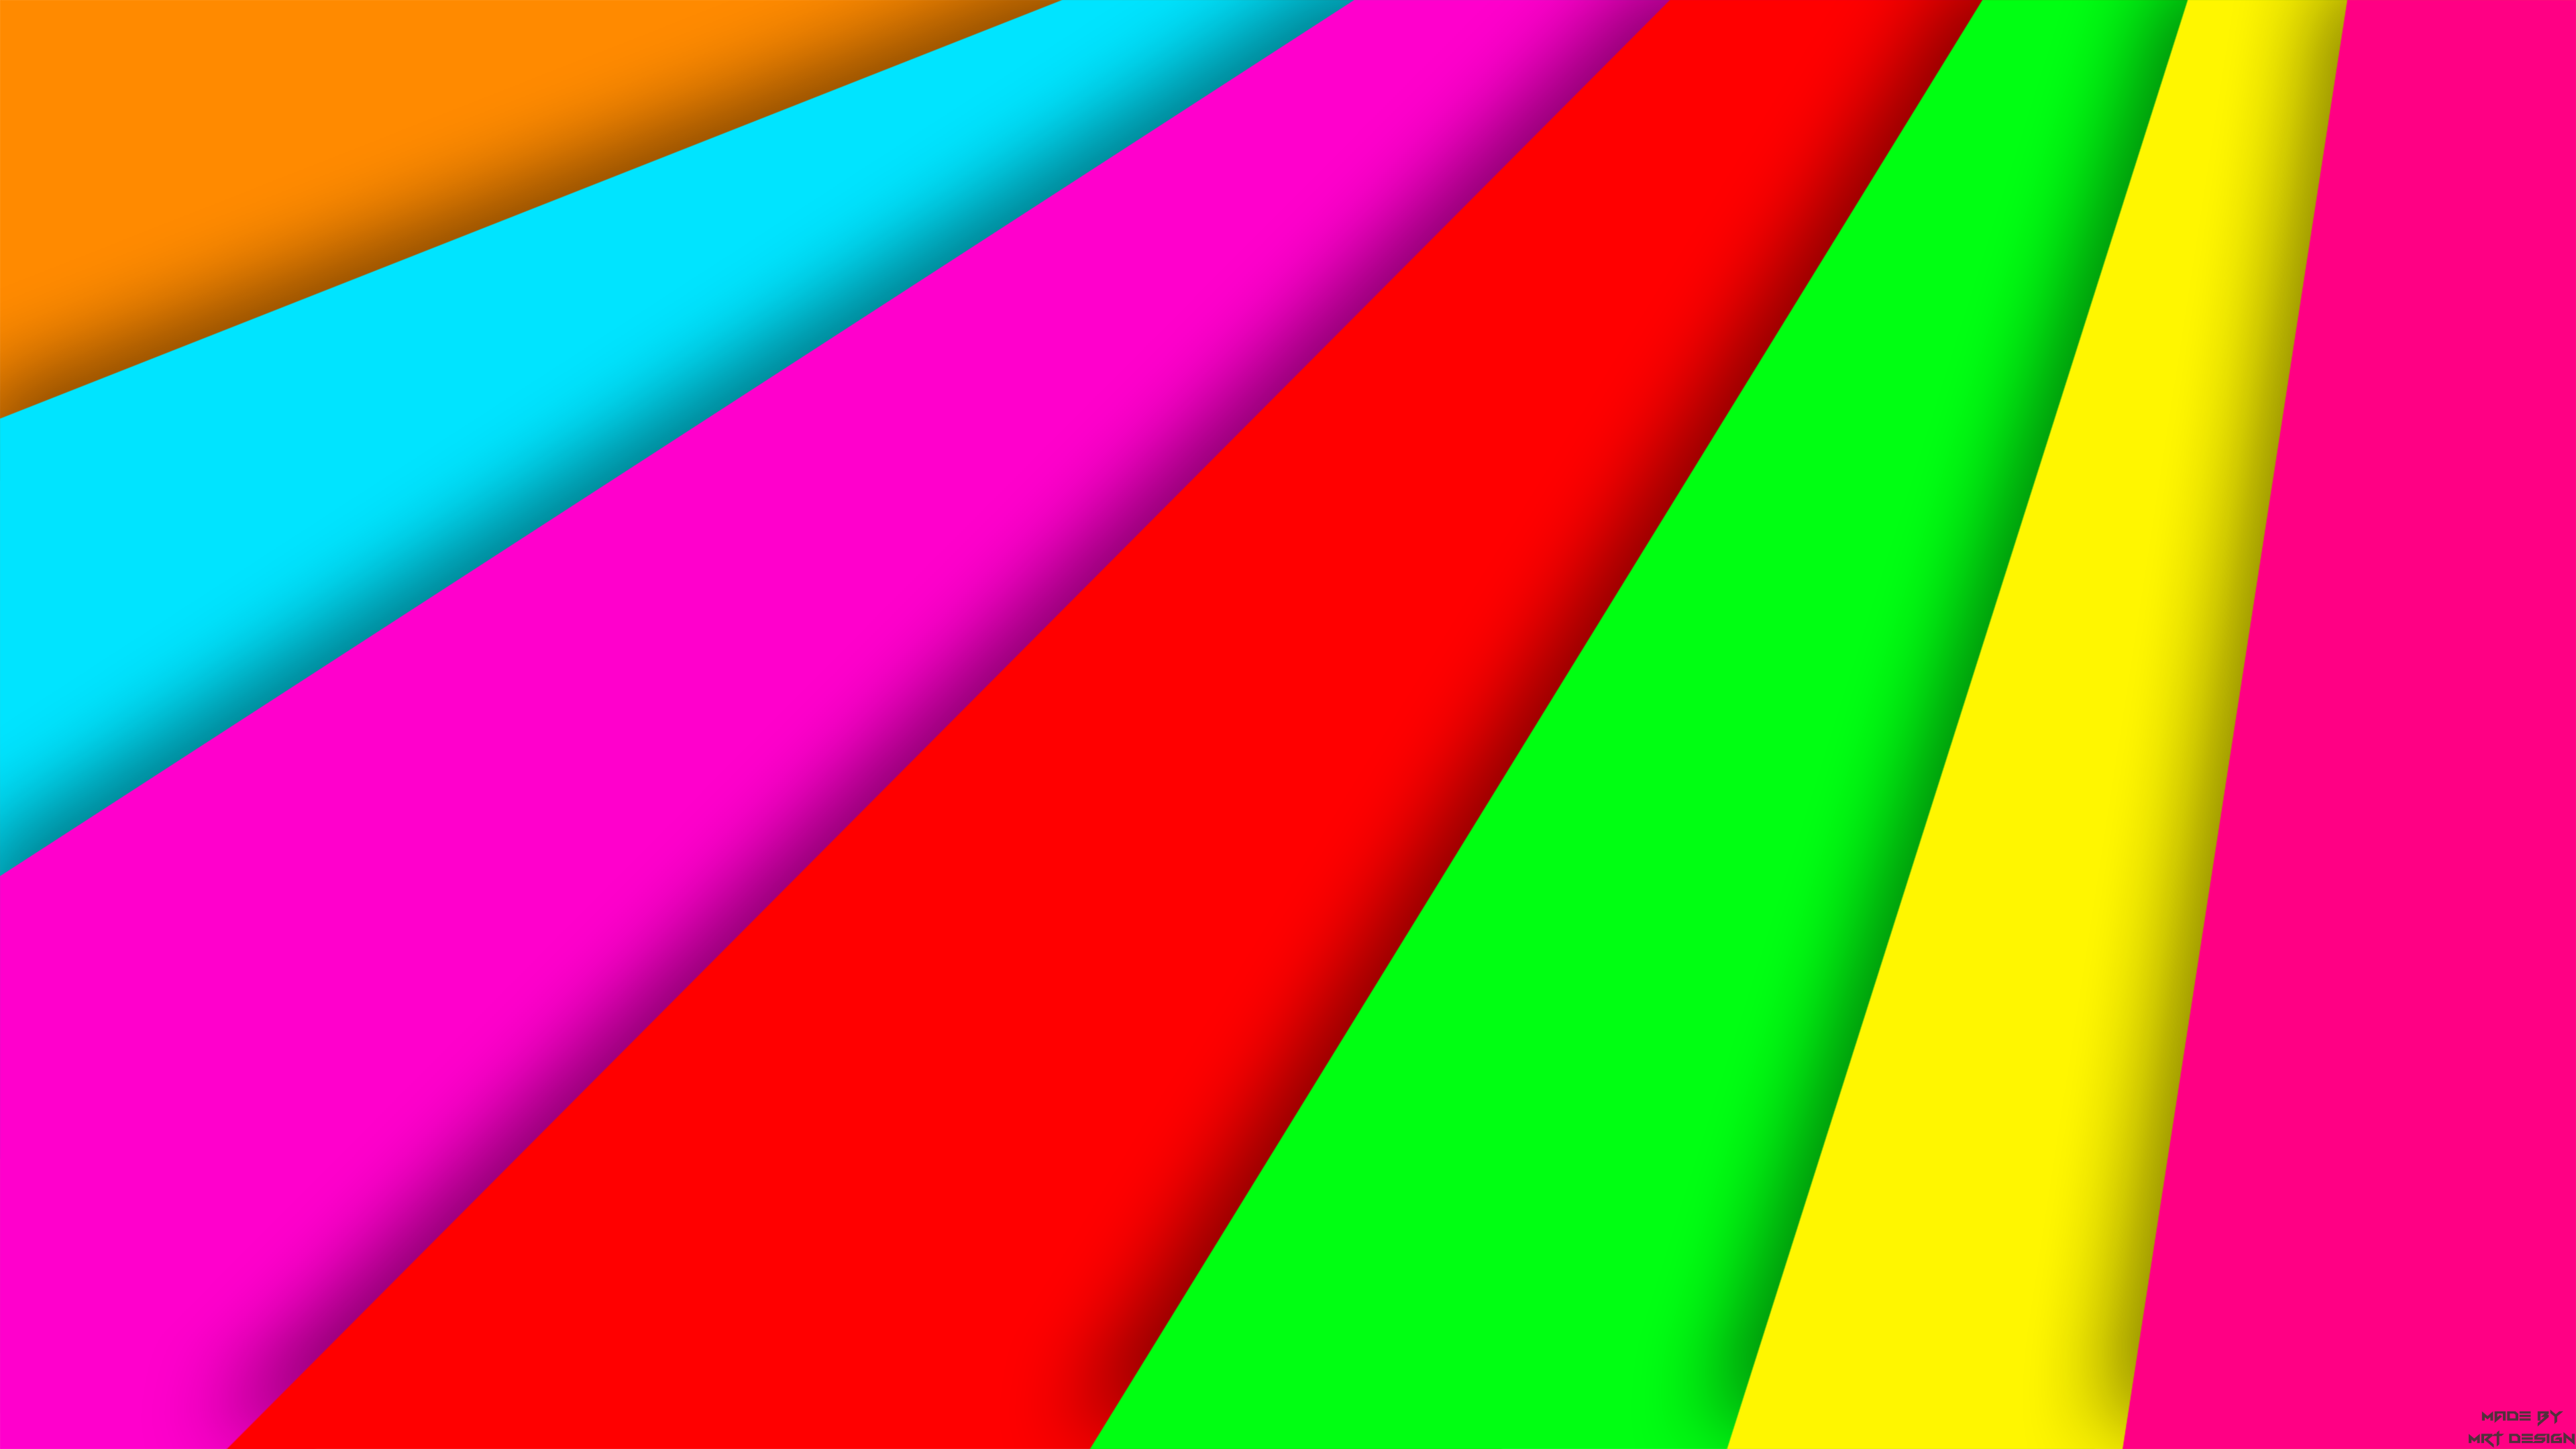 General 3840x2160 material style abstract colorful